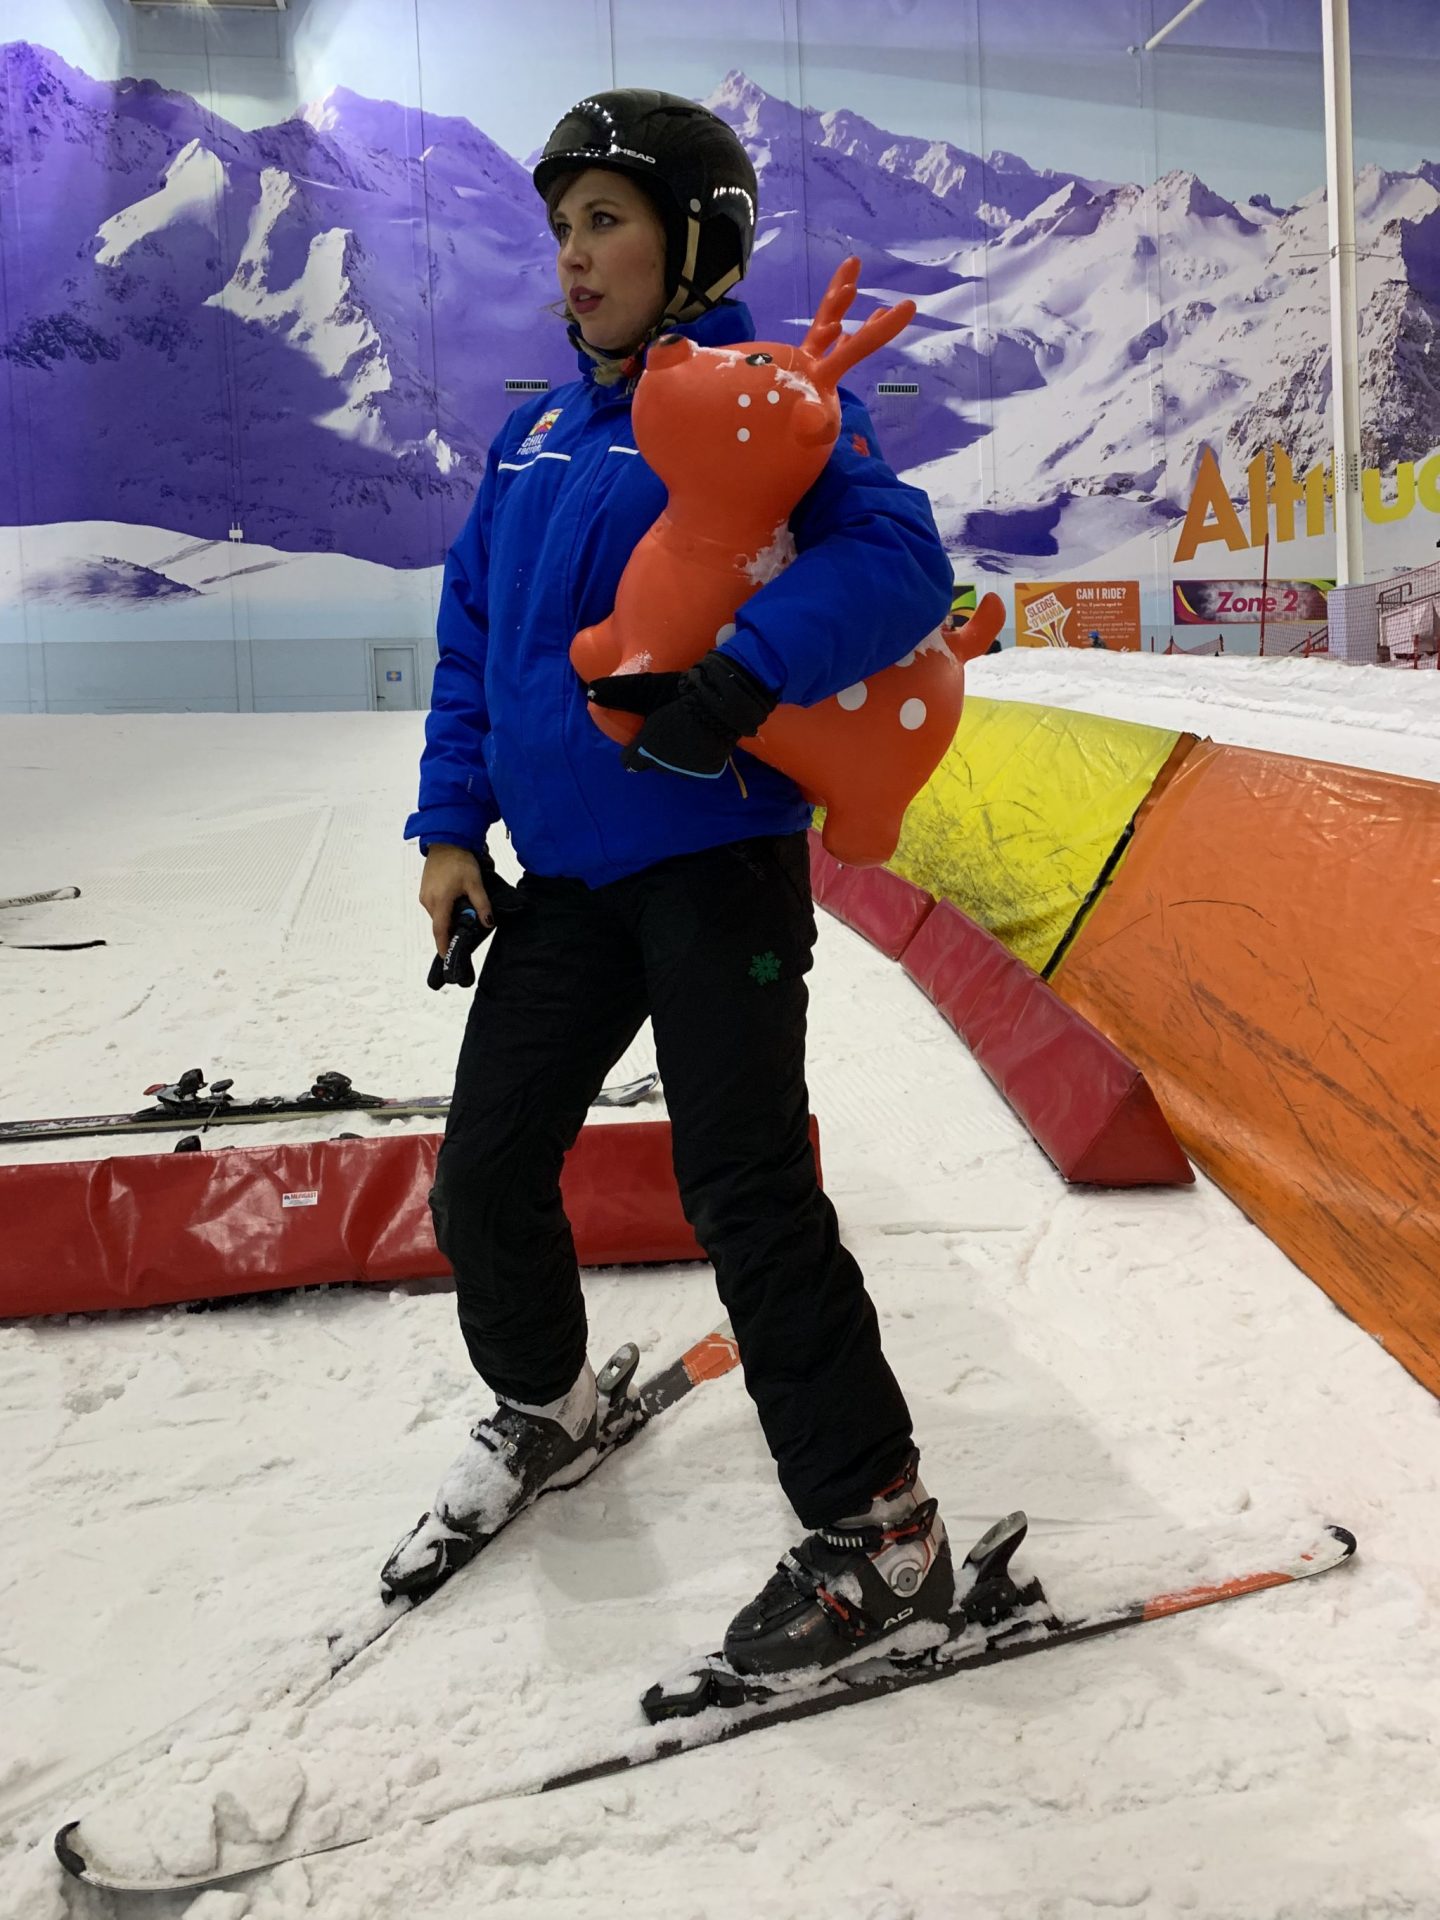 manchester blogger, manchester bloggers, manchester influencers , skiing , skiing course, ski for beginners, ukblogger, blogging , manchester chill factore 